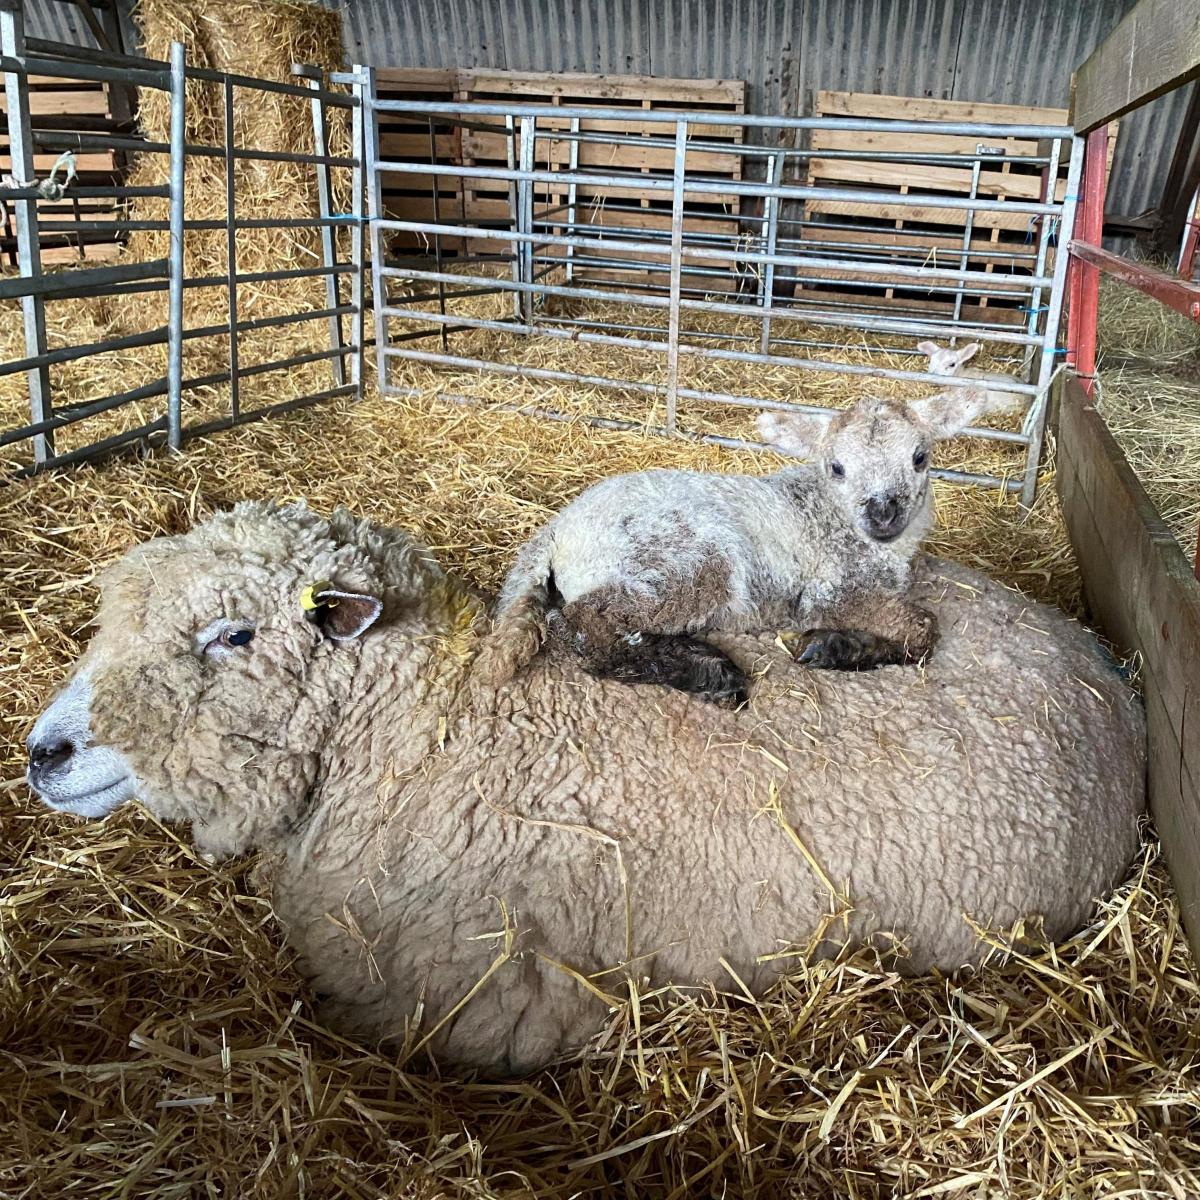 Mandy Rimmer (Braco) - My Ryeland and one of her lambs who finds her Mum irresistibly comfy